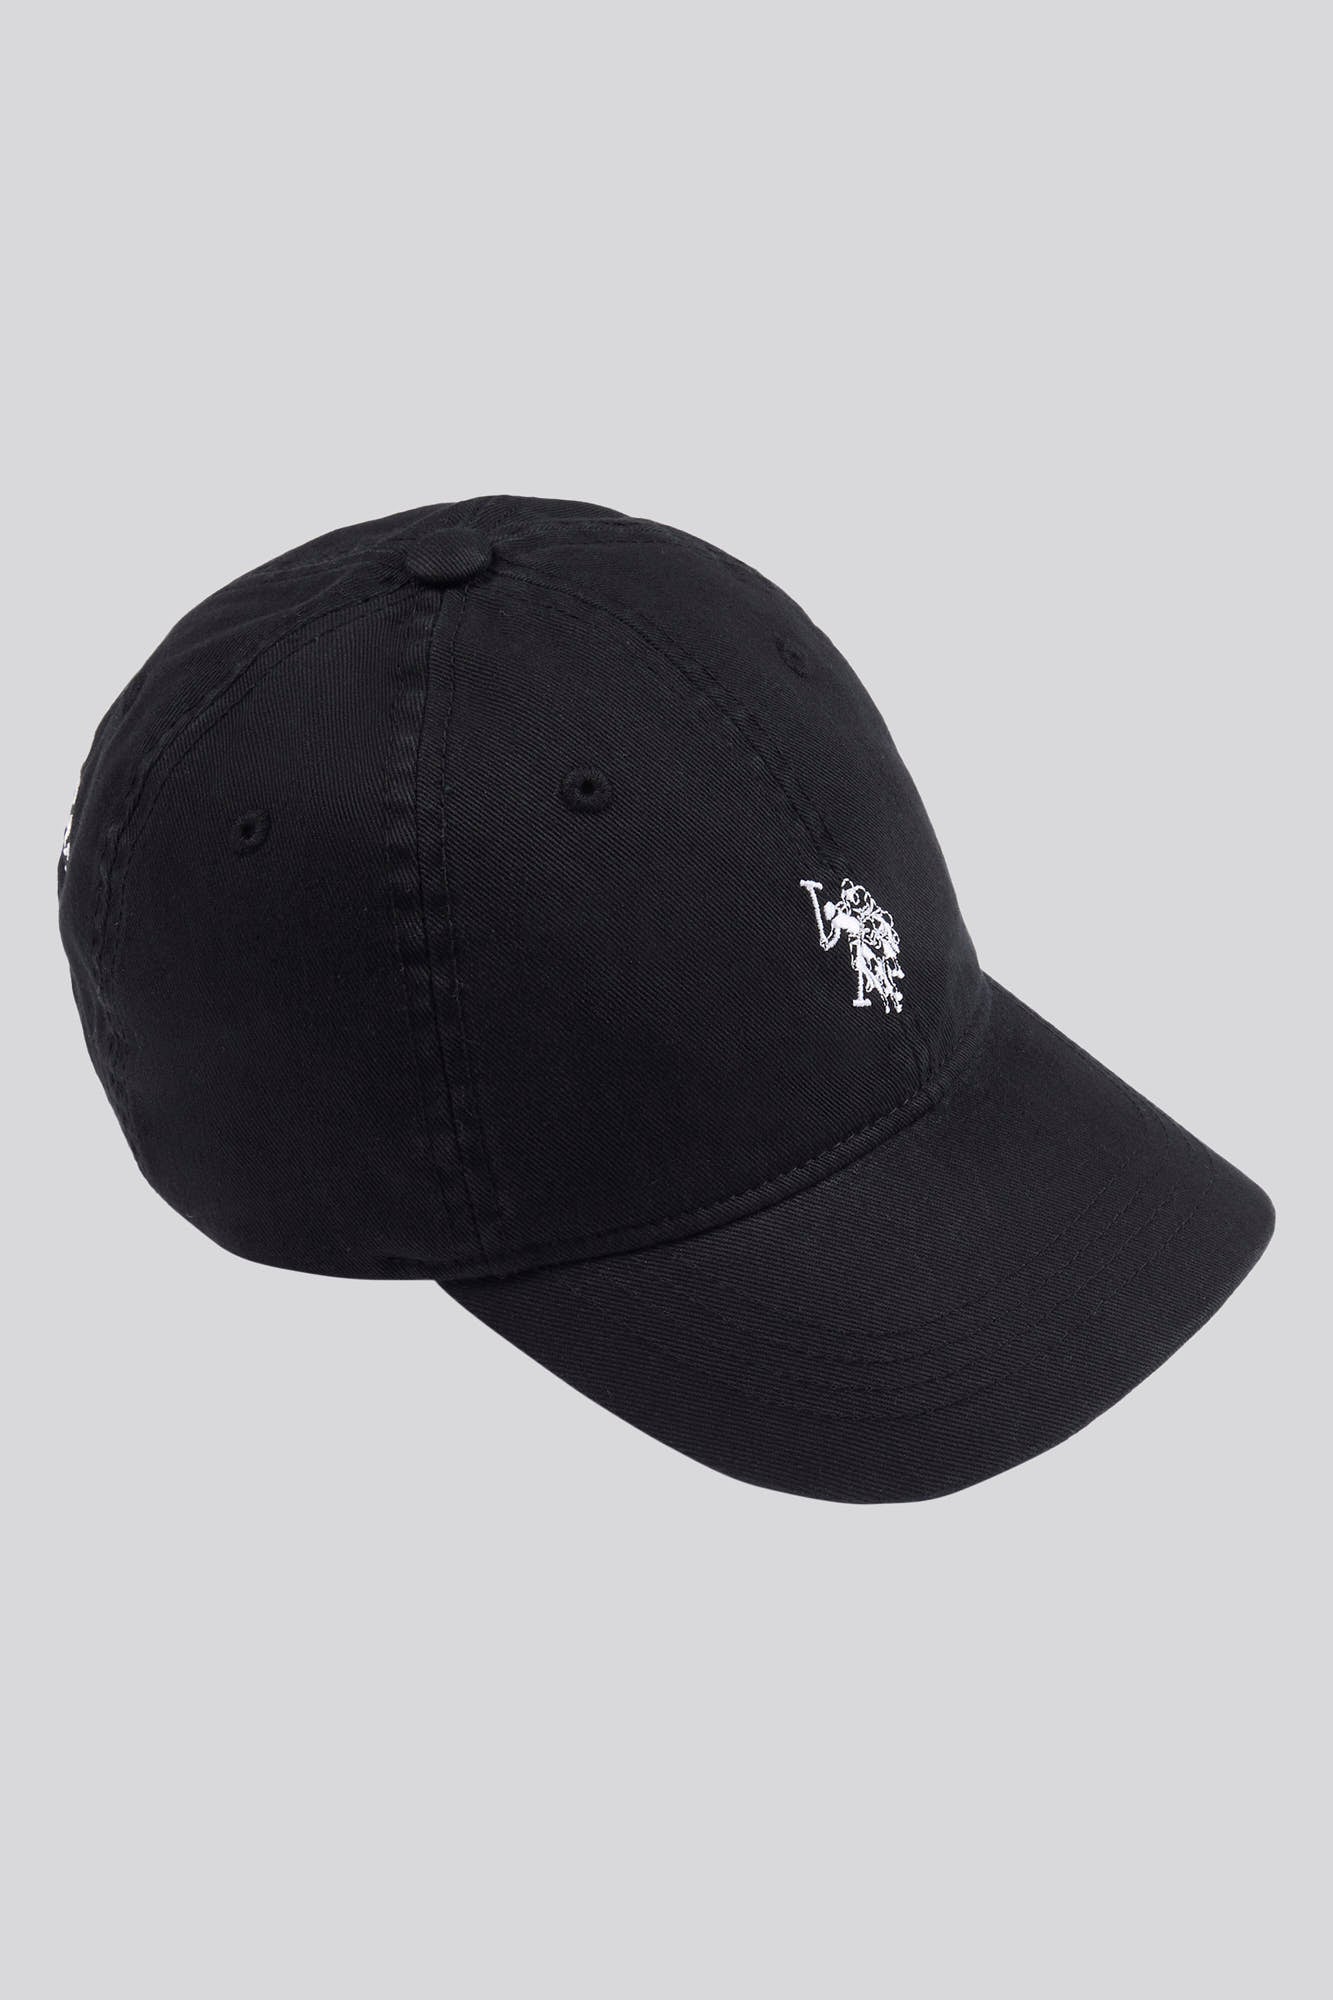 U.S. Polo Assn. Outline DHM Washed Casual Cap Black Bright White DHM